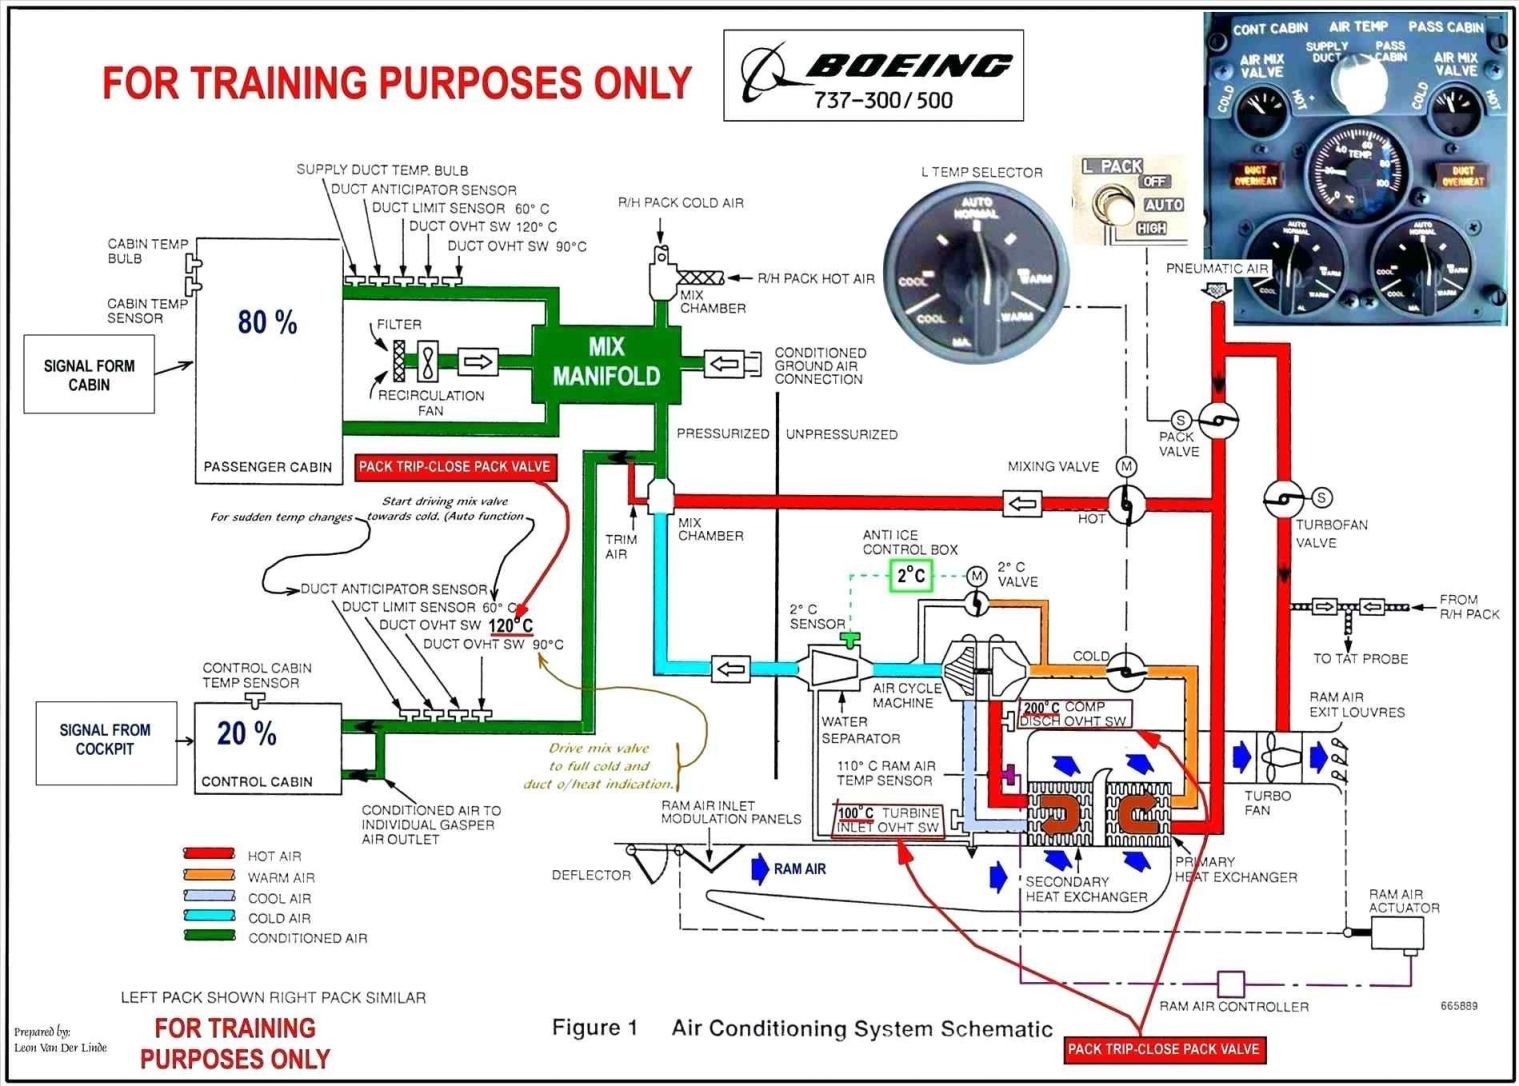 Automotive Cooling Wiring Diagram Car Air Conditioning System Wiring Diagram Pdf Gallery Of Automotive Cooling Wiring Diagram